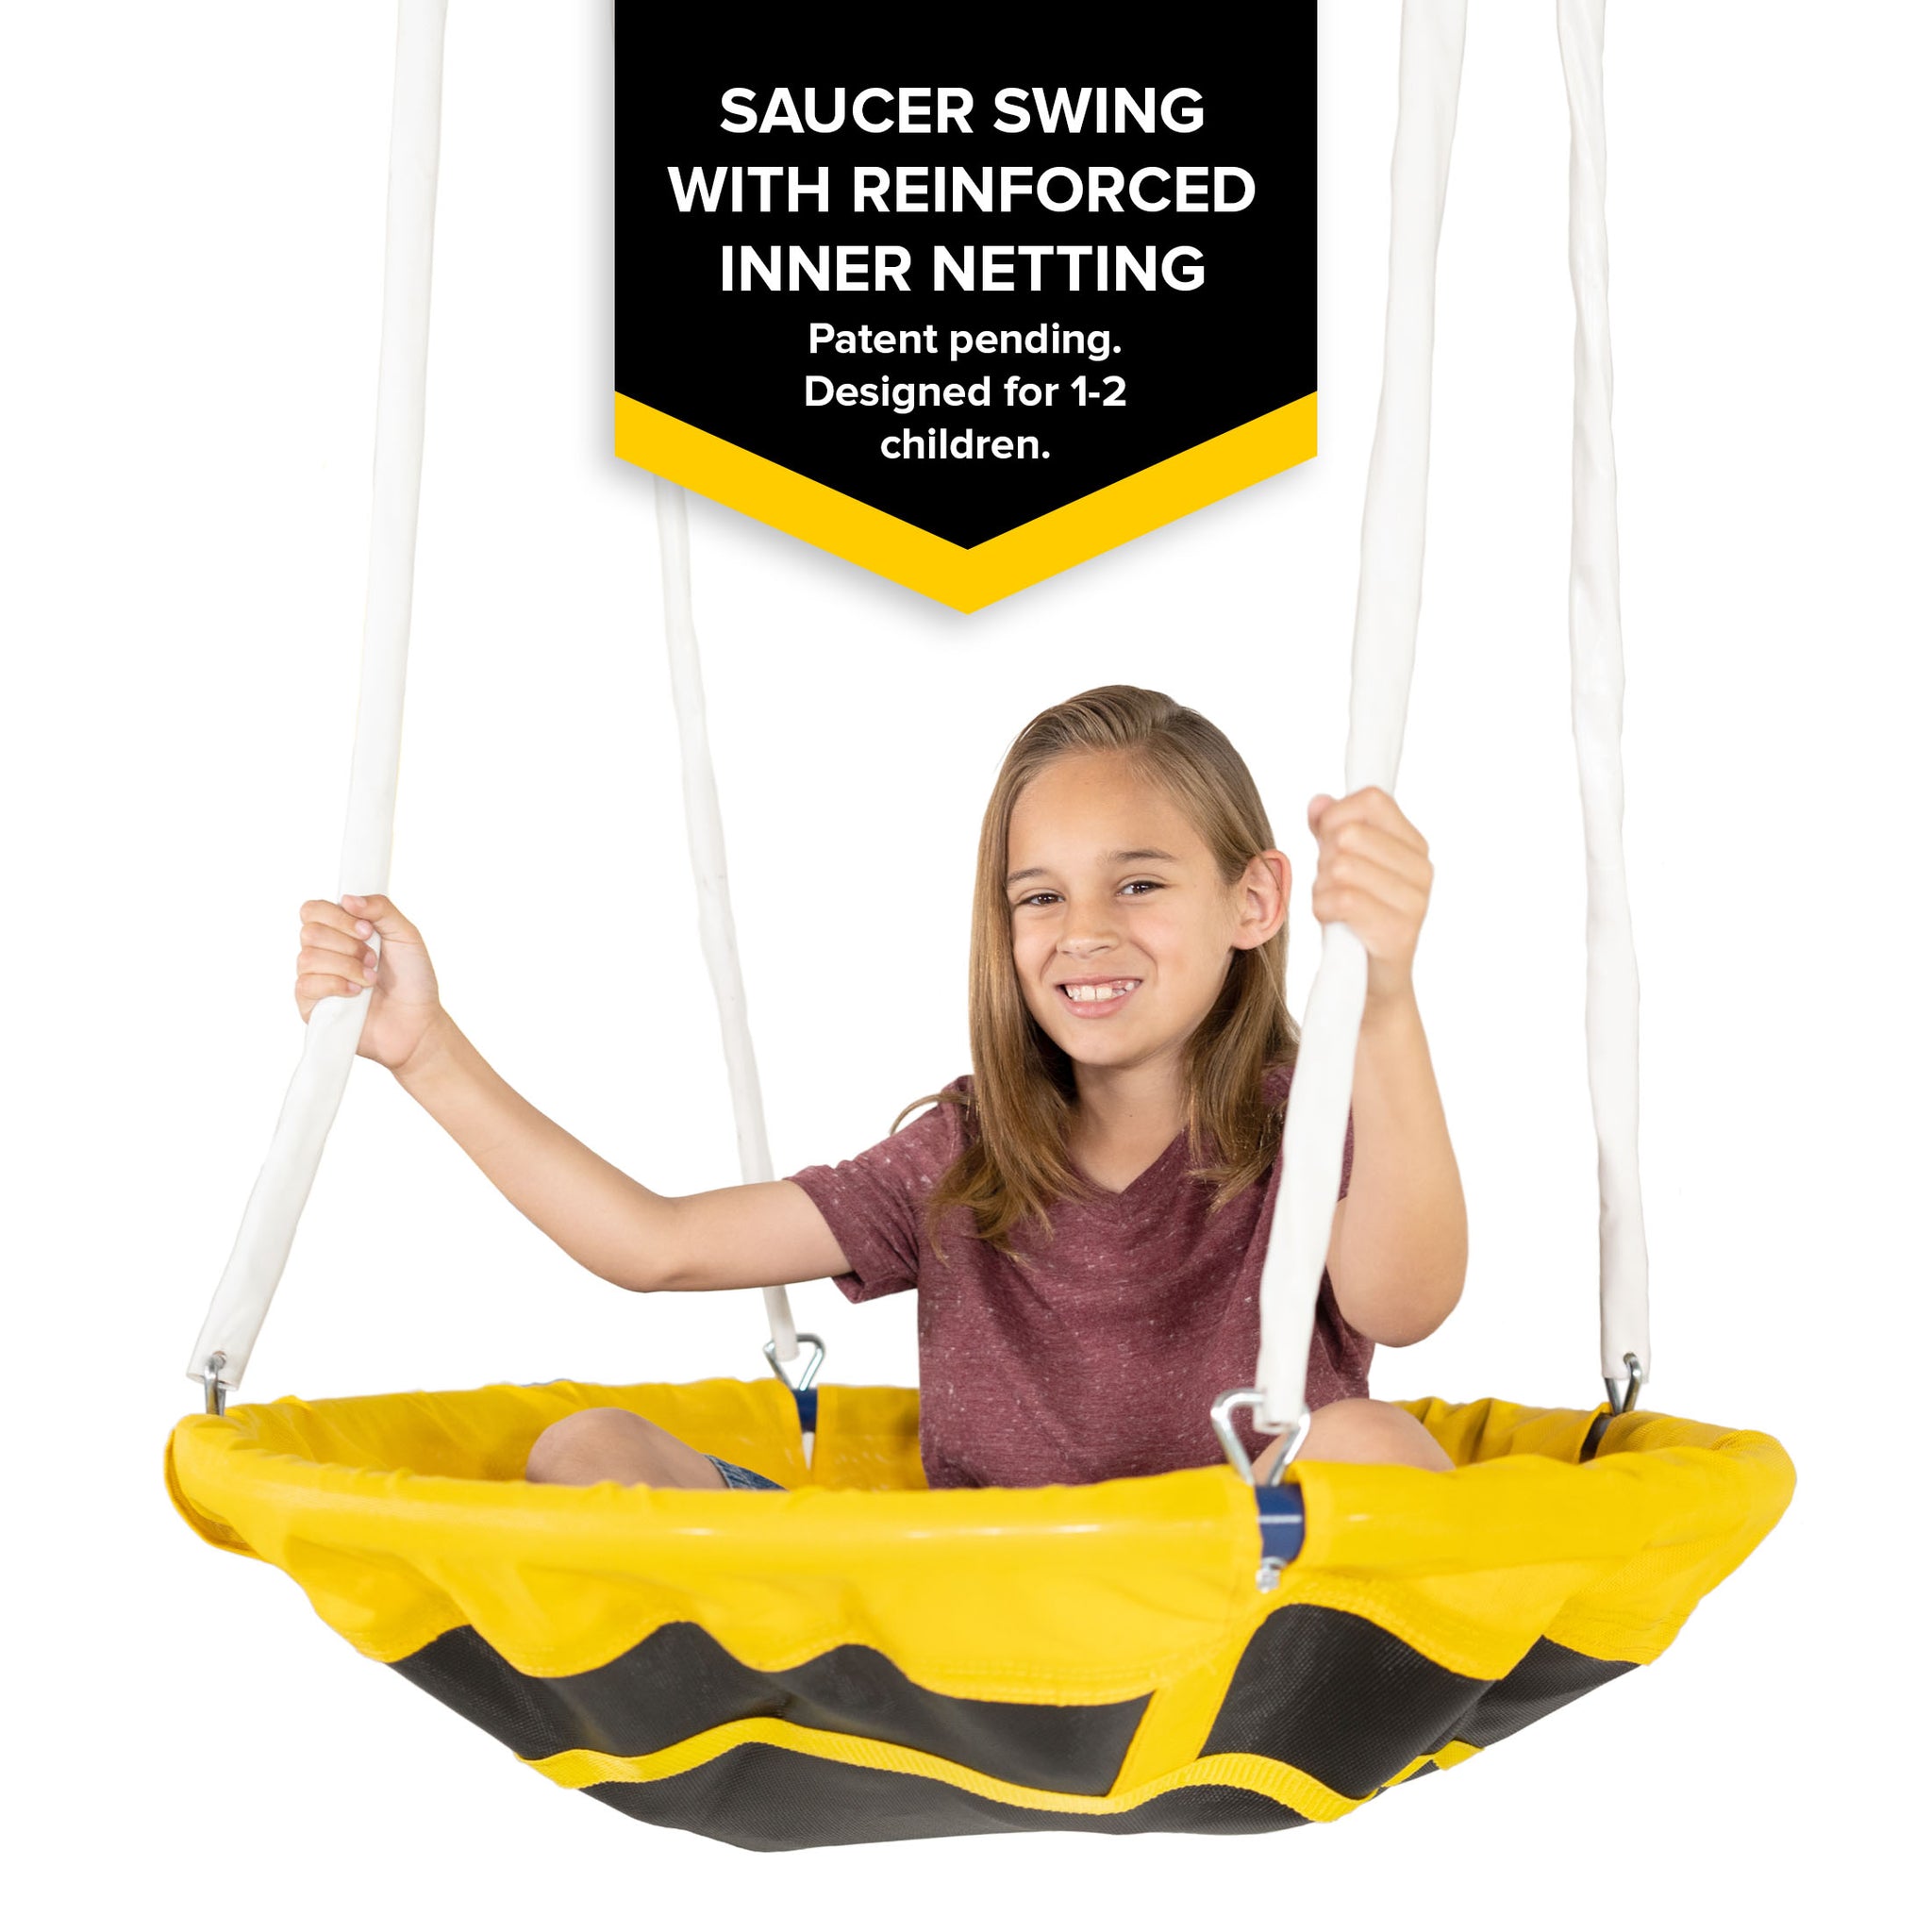  Sportspower Super Surfer Metal Swing Set with 6ft Slide,  Skyflyer Swing, Surfboard Swing, Standing Swing and Classic Sling Swing  with Slide : Toys & Games